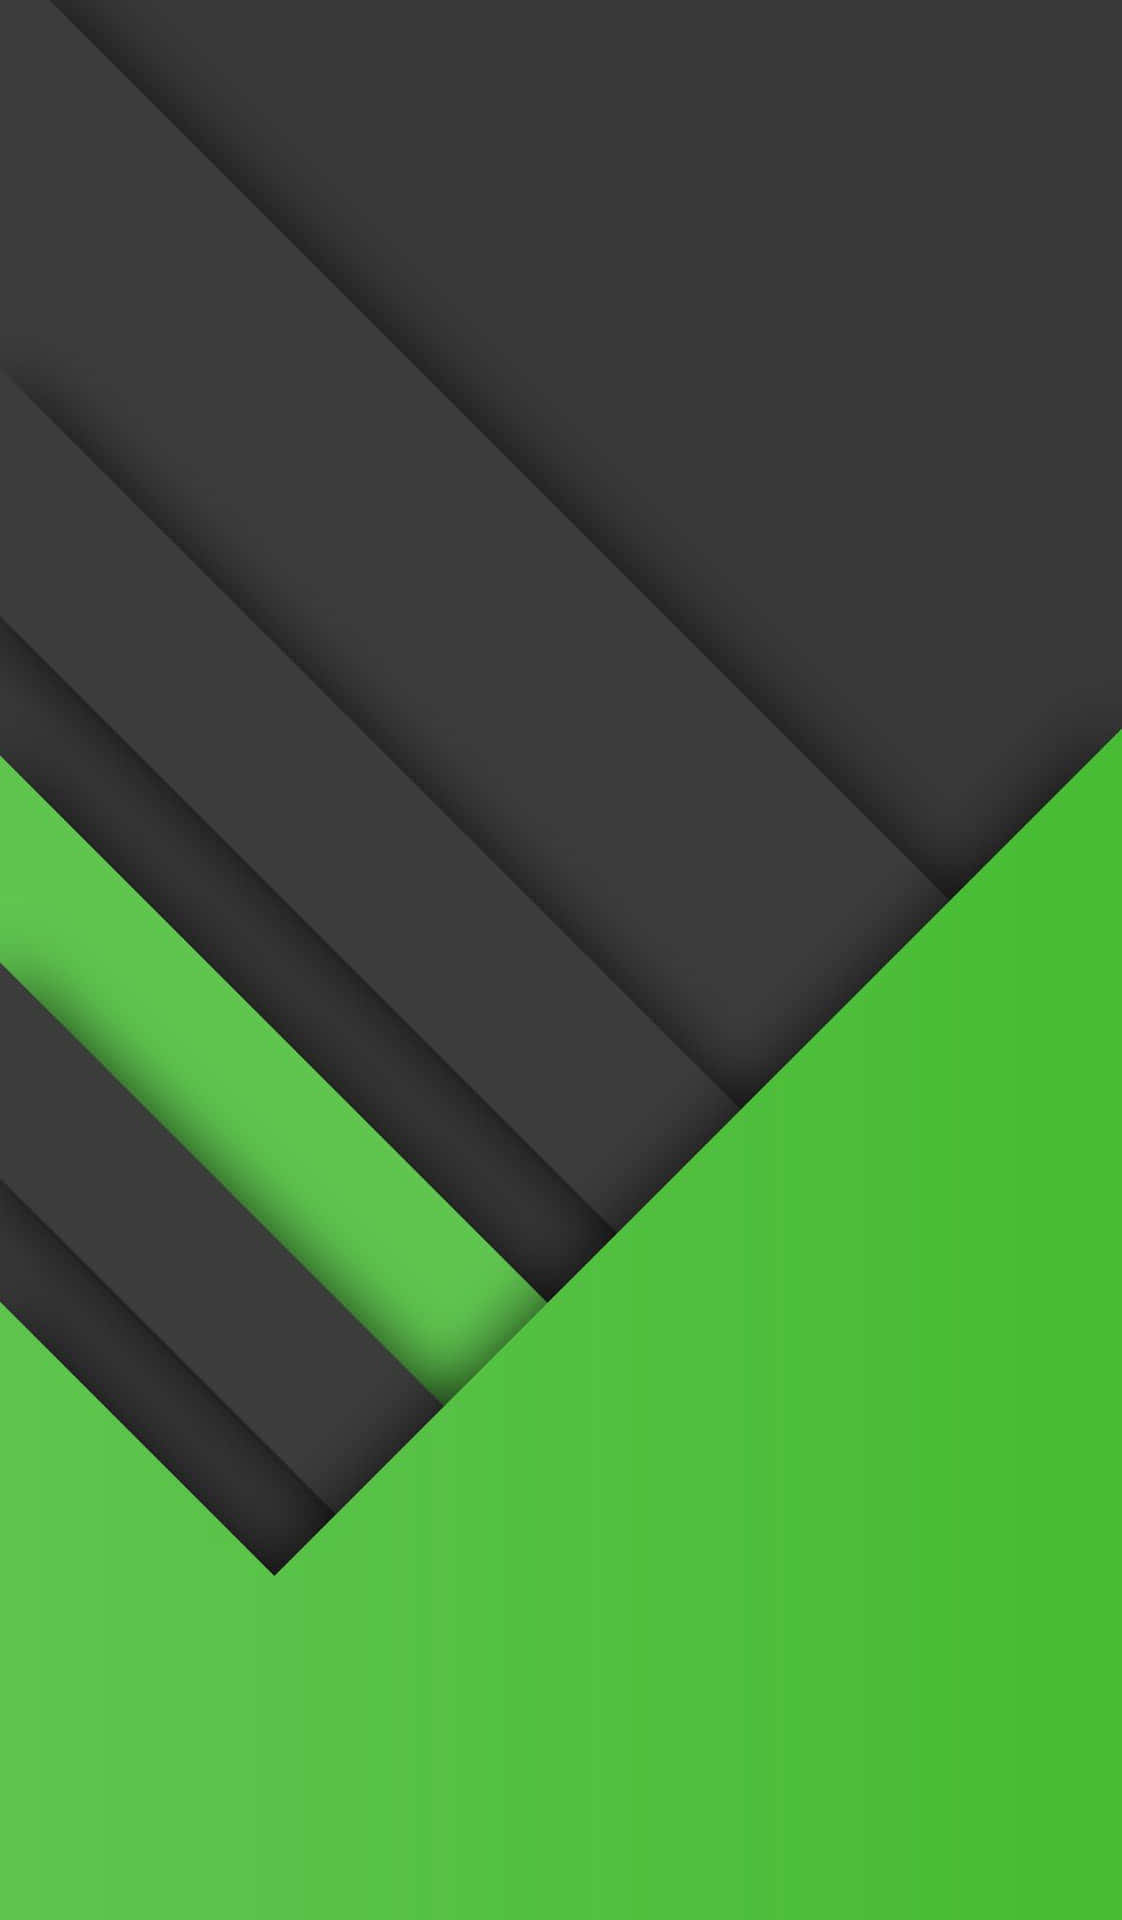 Iphone X Material Background Black Green Shapes Background